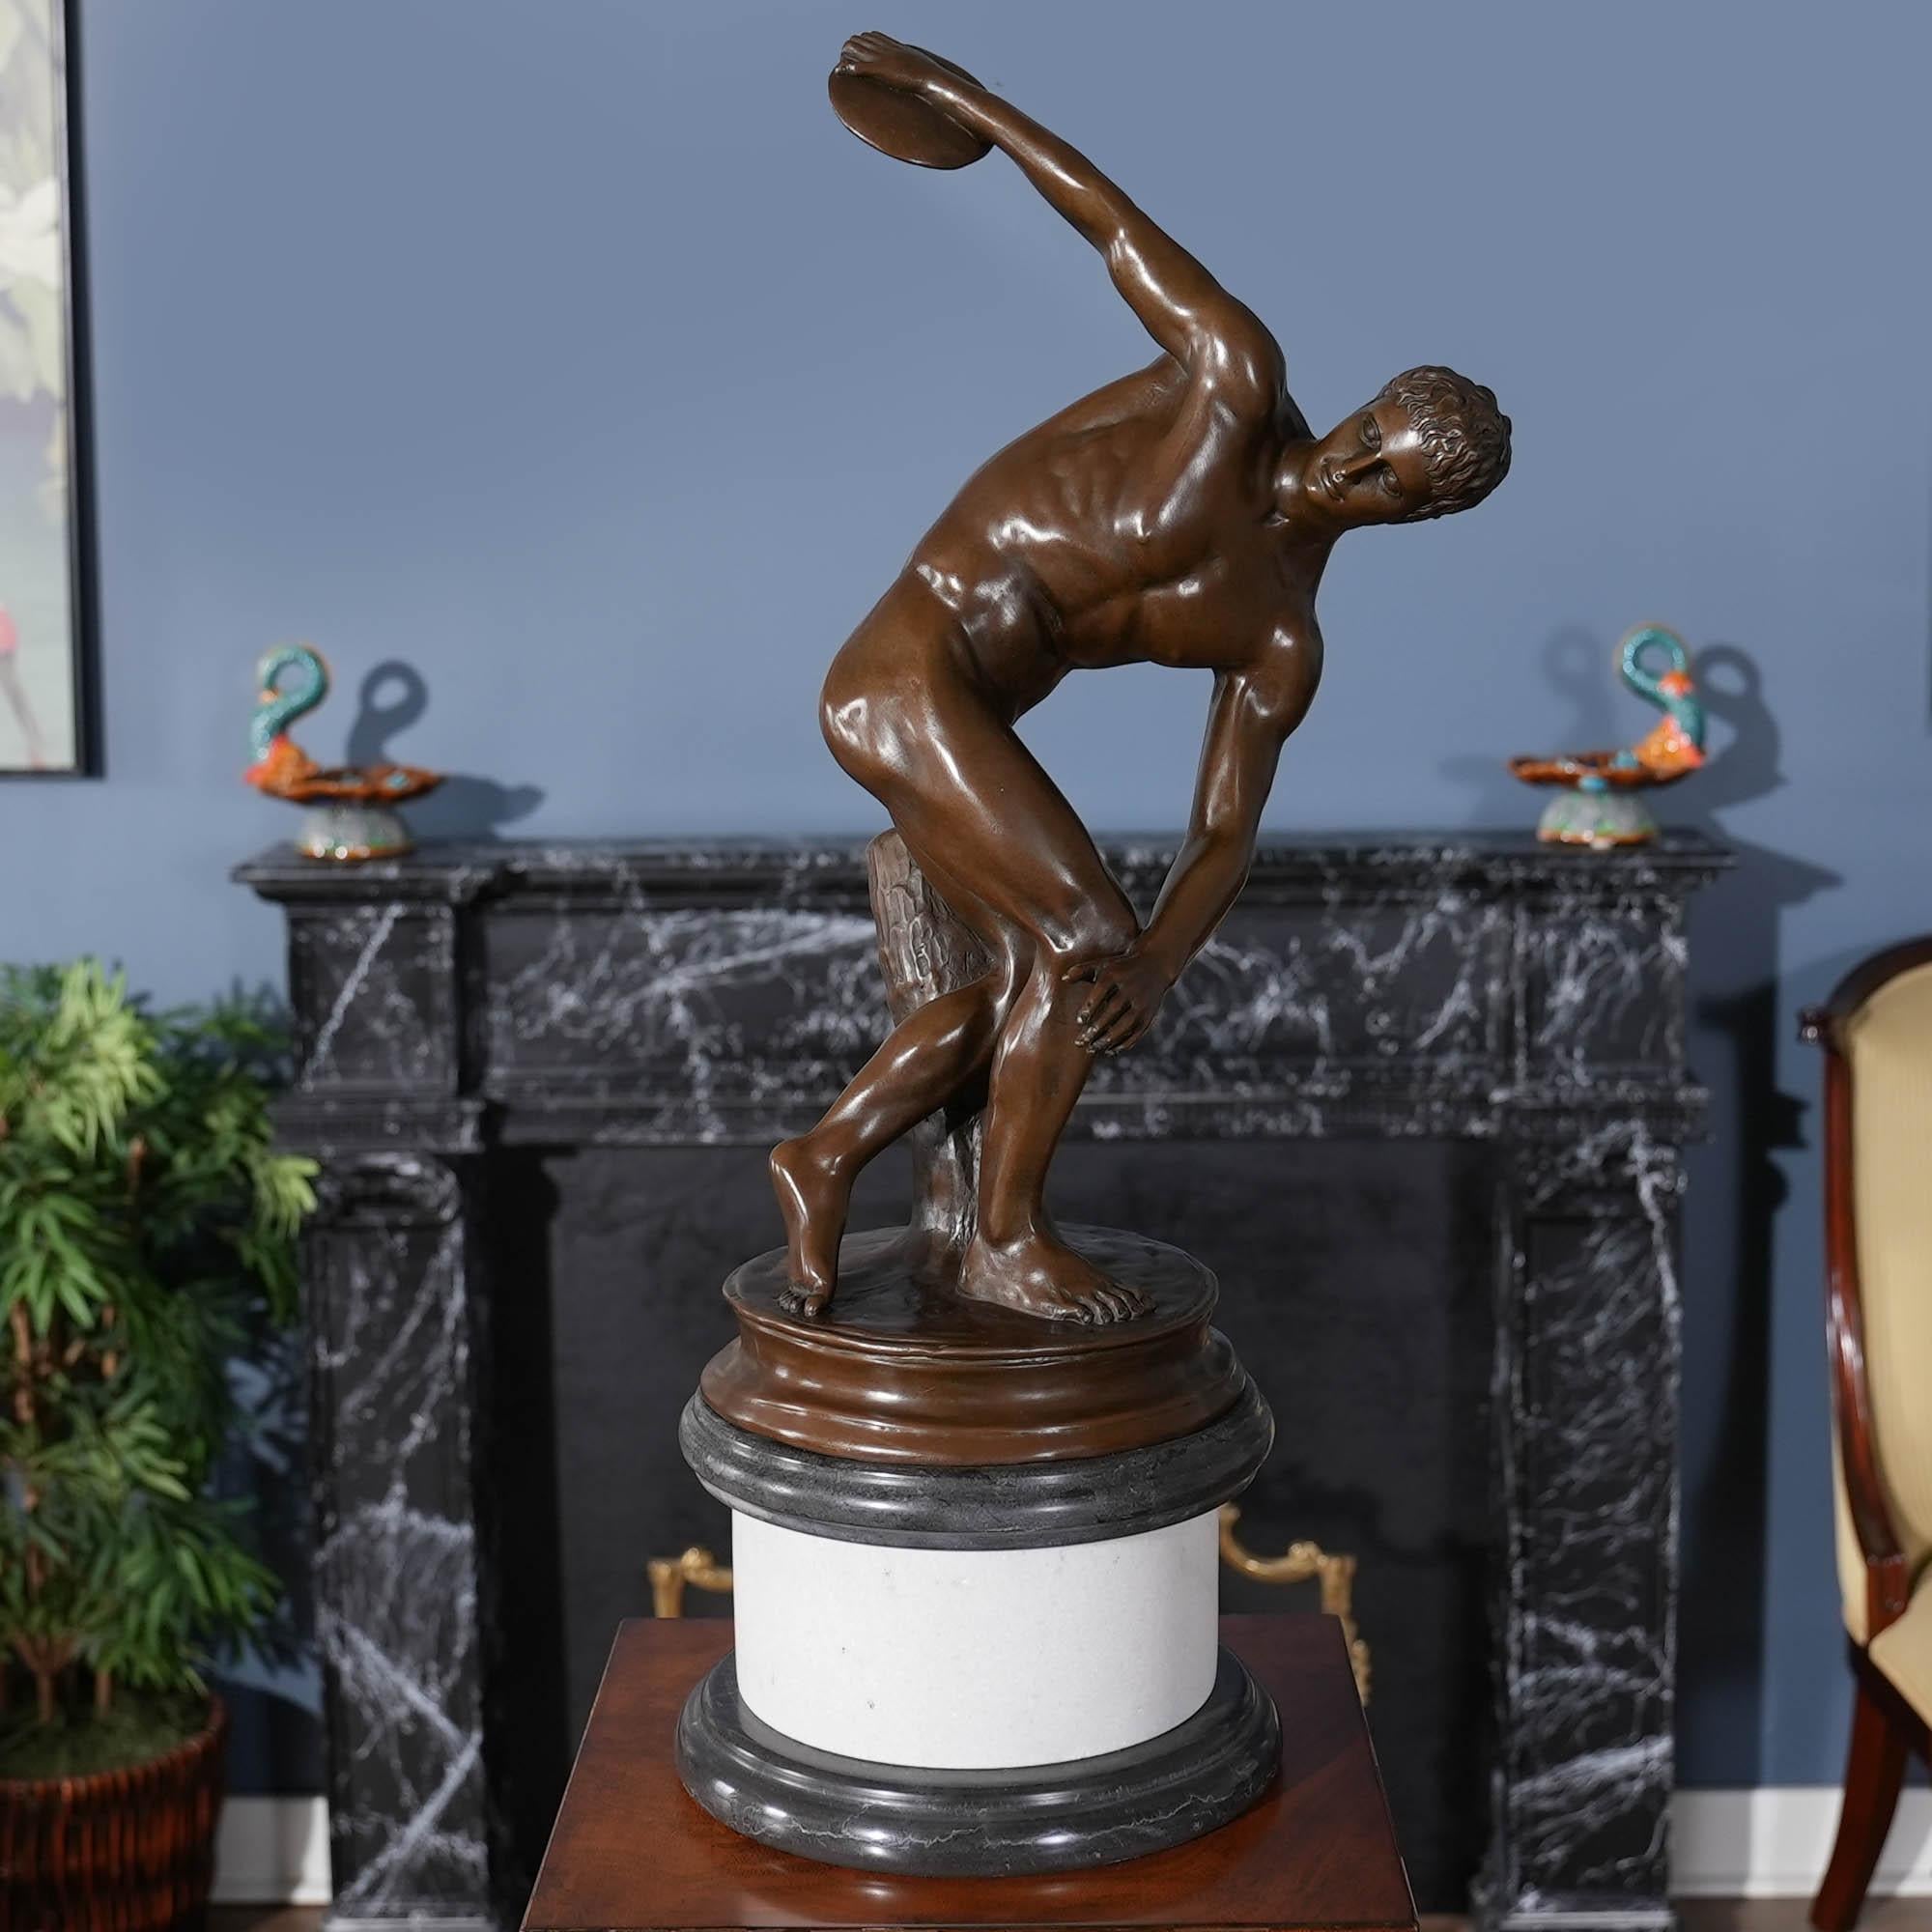 Graceful even when standing still the Bronze Discus Thrower on Marble Base is a striking addition to any setting. Using traditional lost wax casting methods the Bronze Discus Thrower statue has hand chaised details added to give a high level of